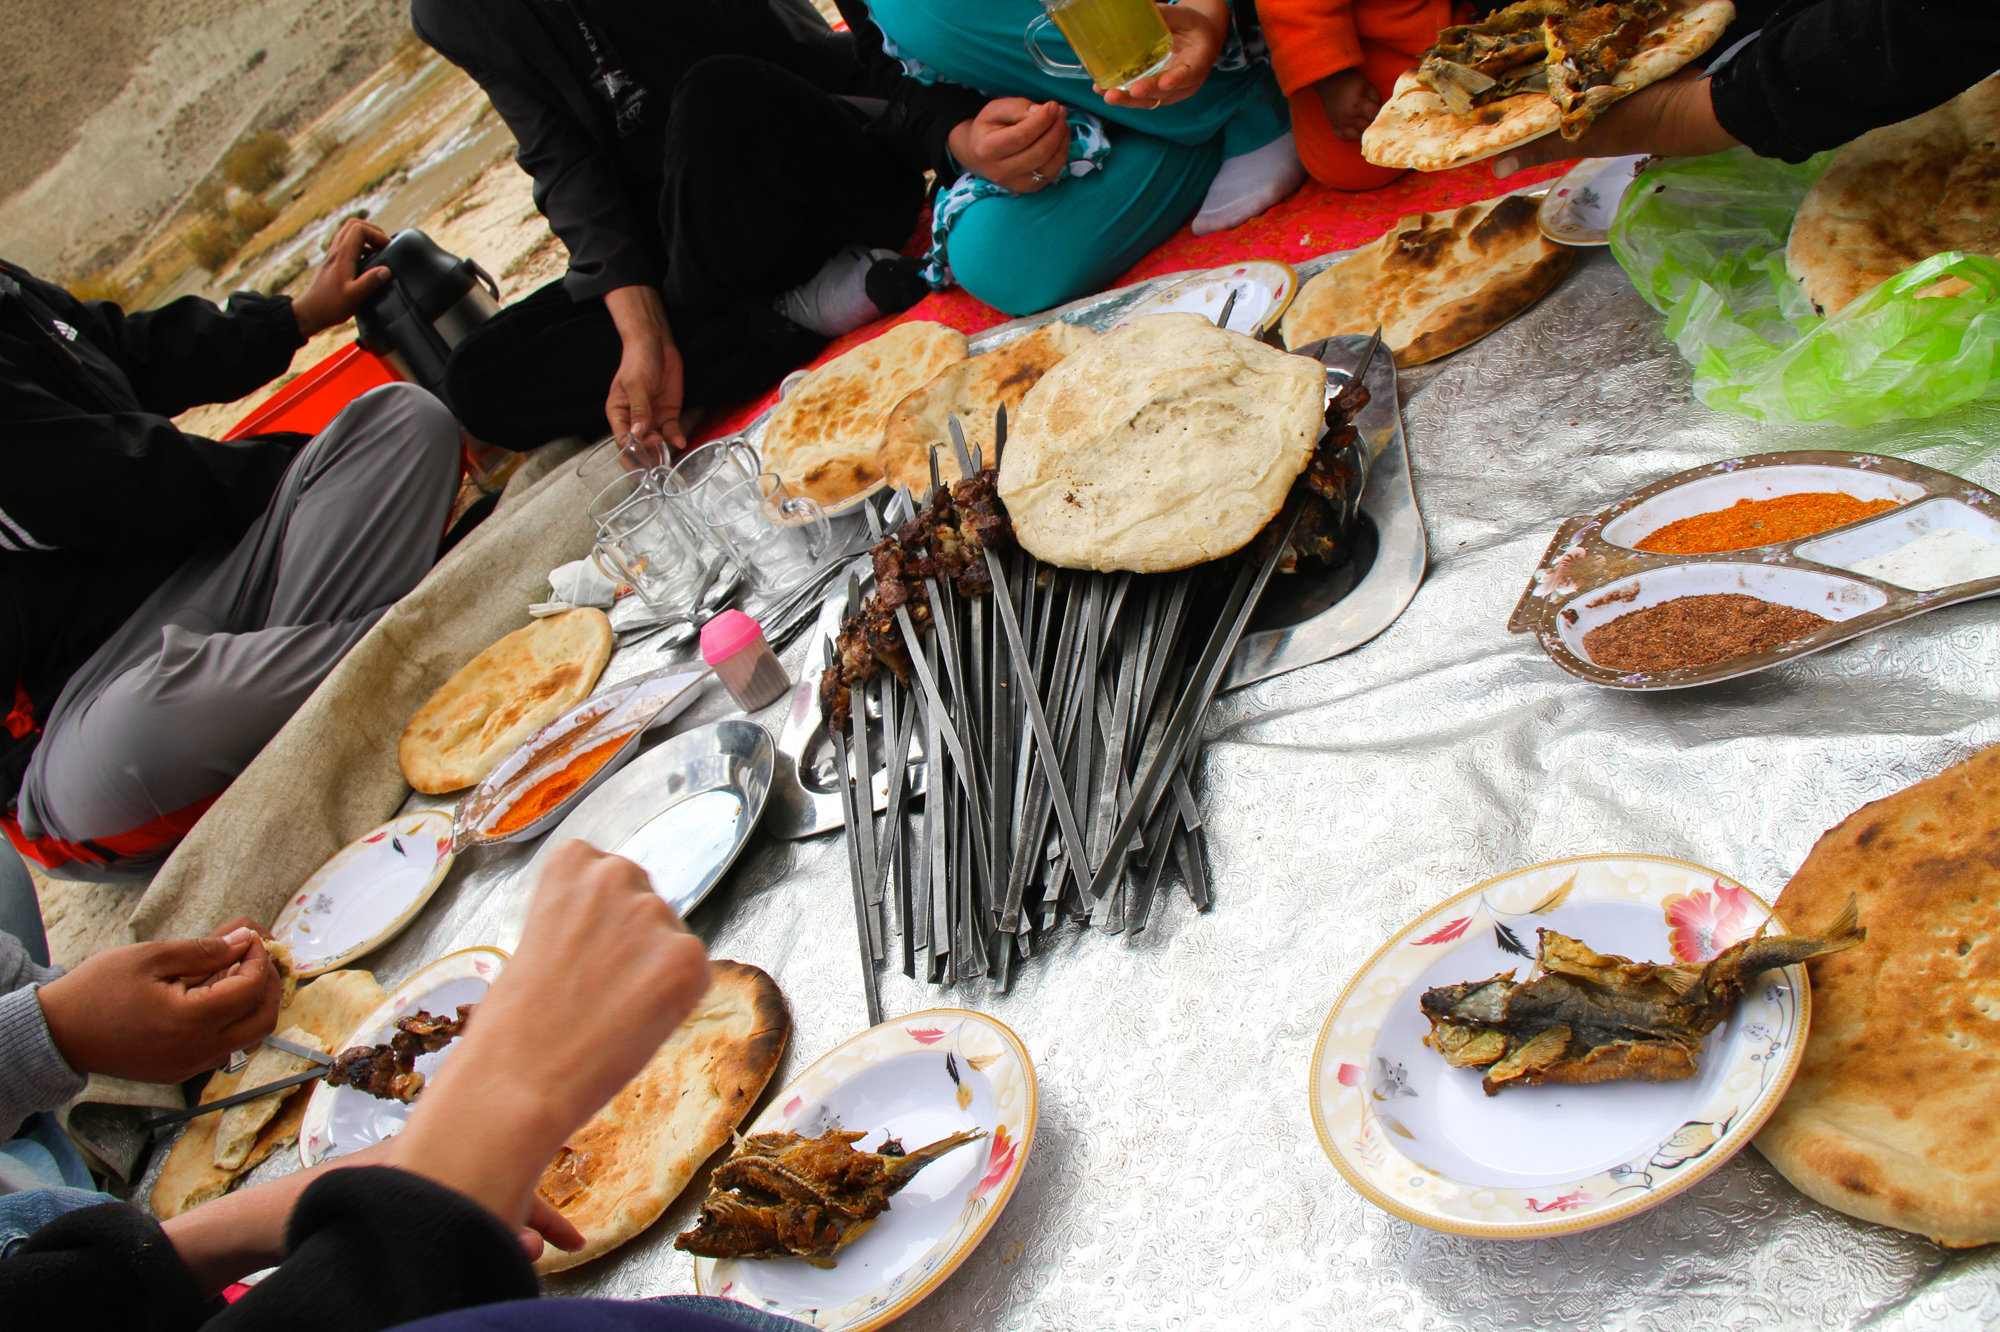 A picnic held in Band-e-Amir National Park, Bamiyan, Afghanistan in 2012. Traditionally, Nowruz marks the start of picnic season in Afghanistan.